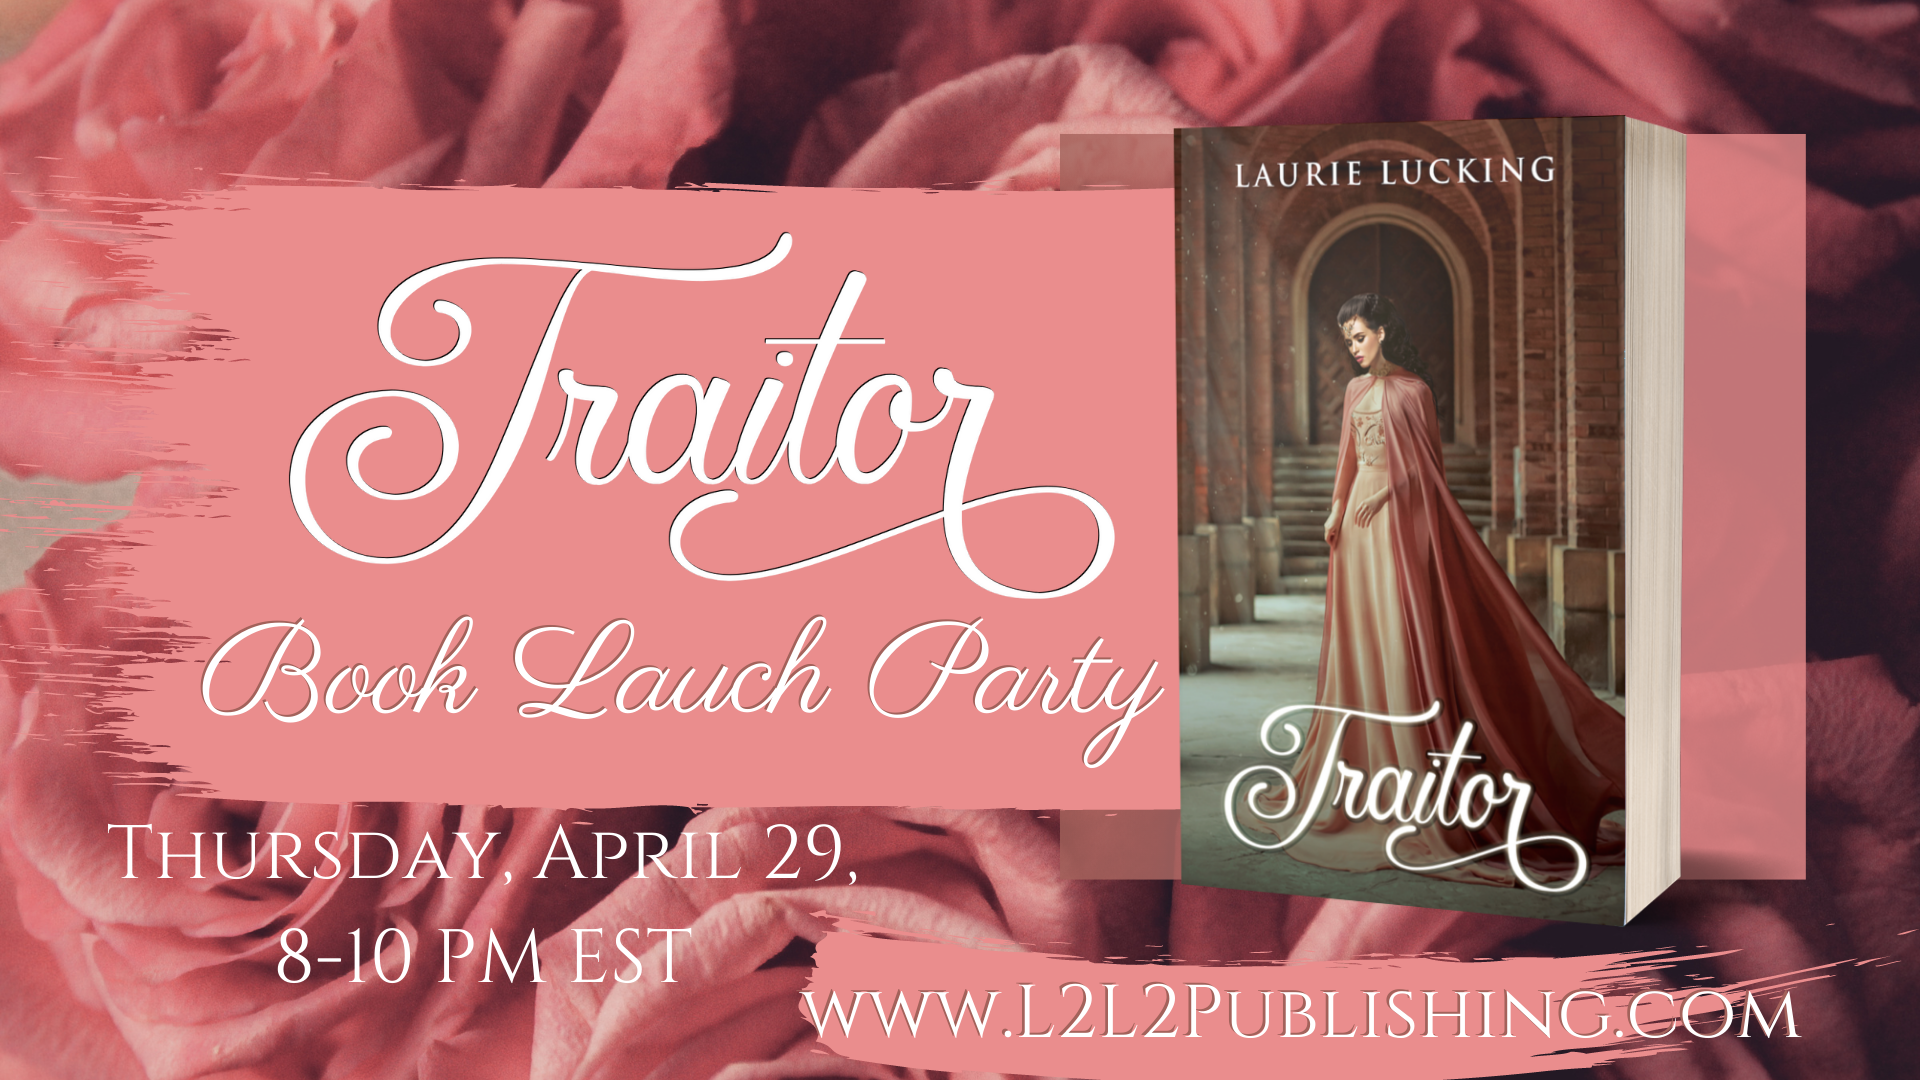 Celebrate New Book Traitor with Us Tonight!